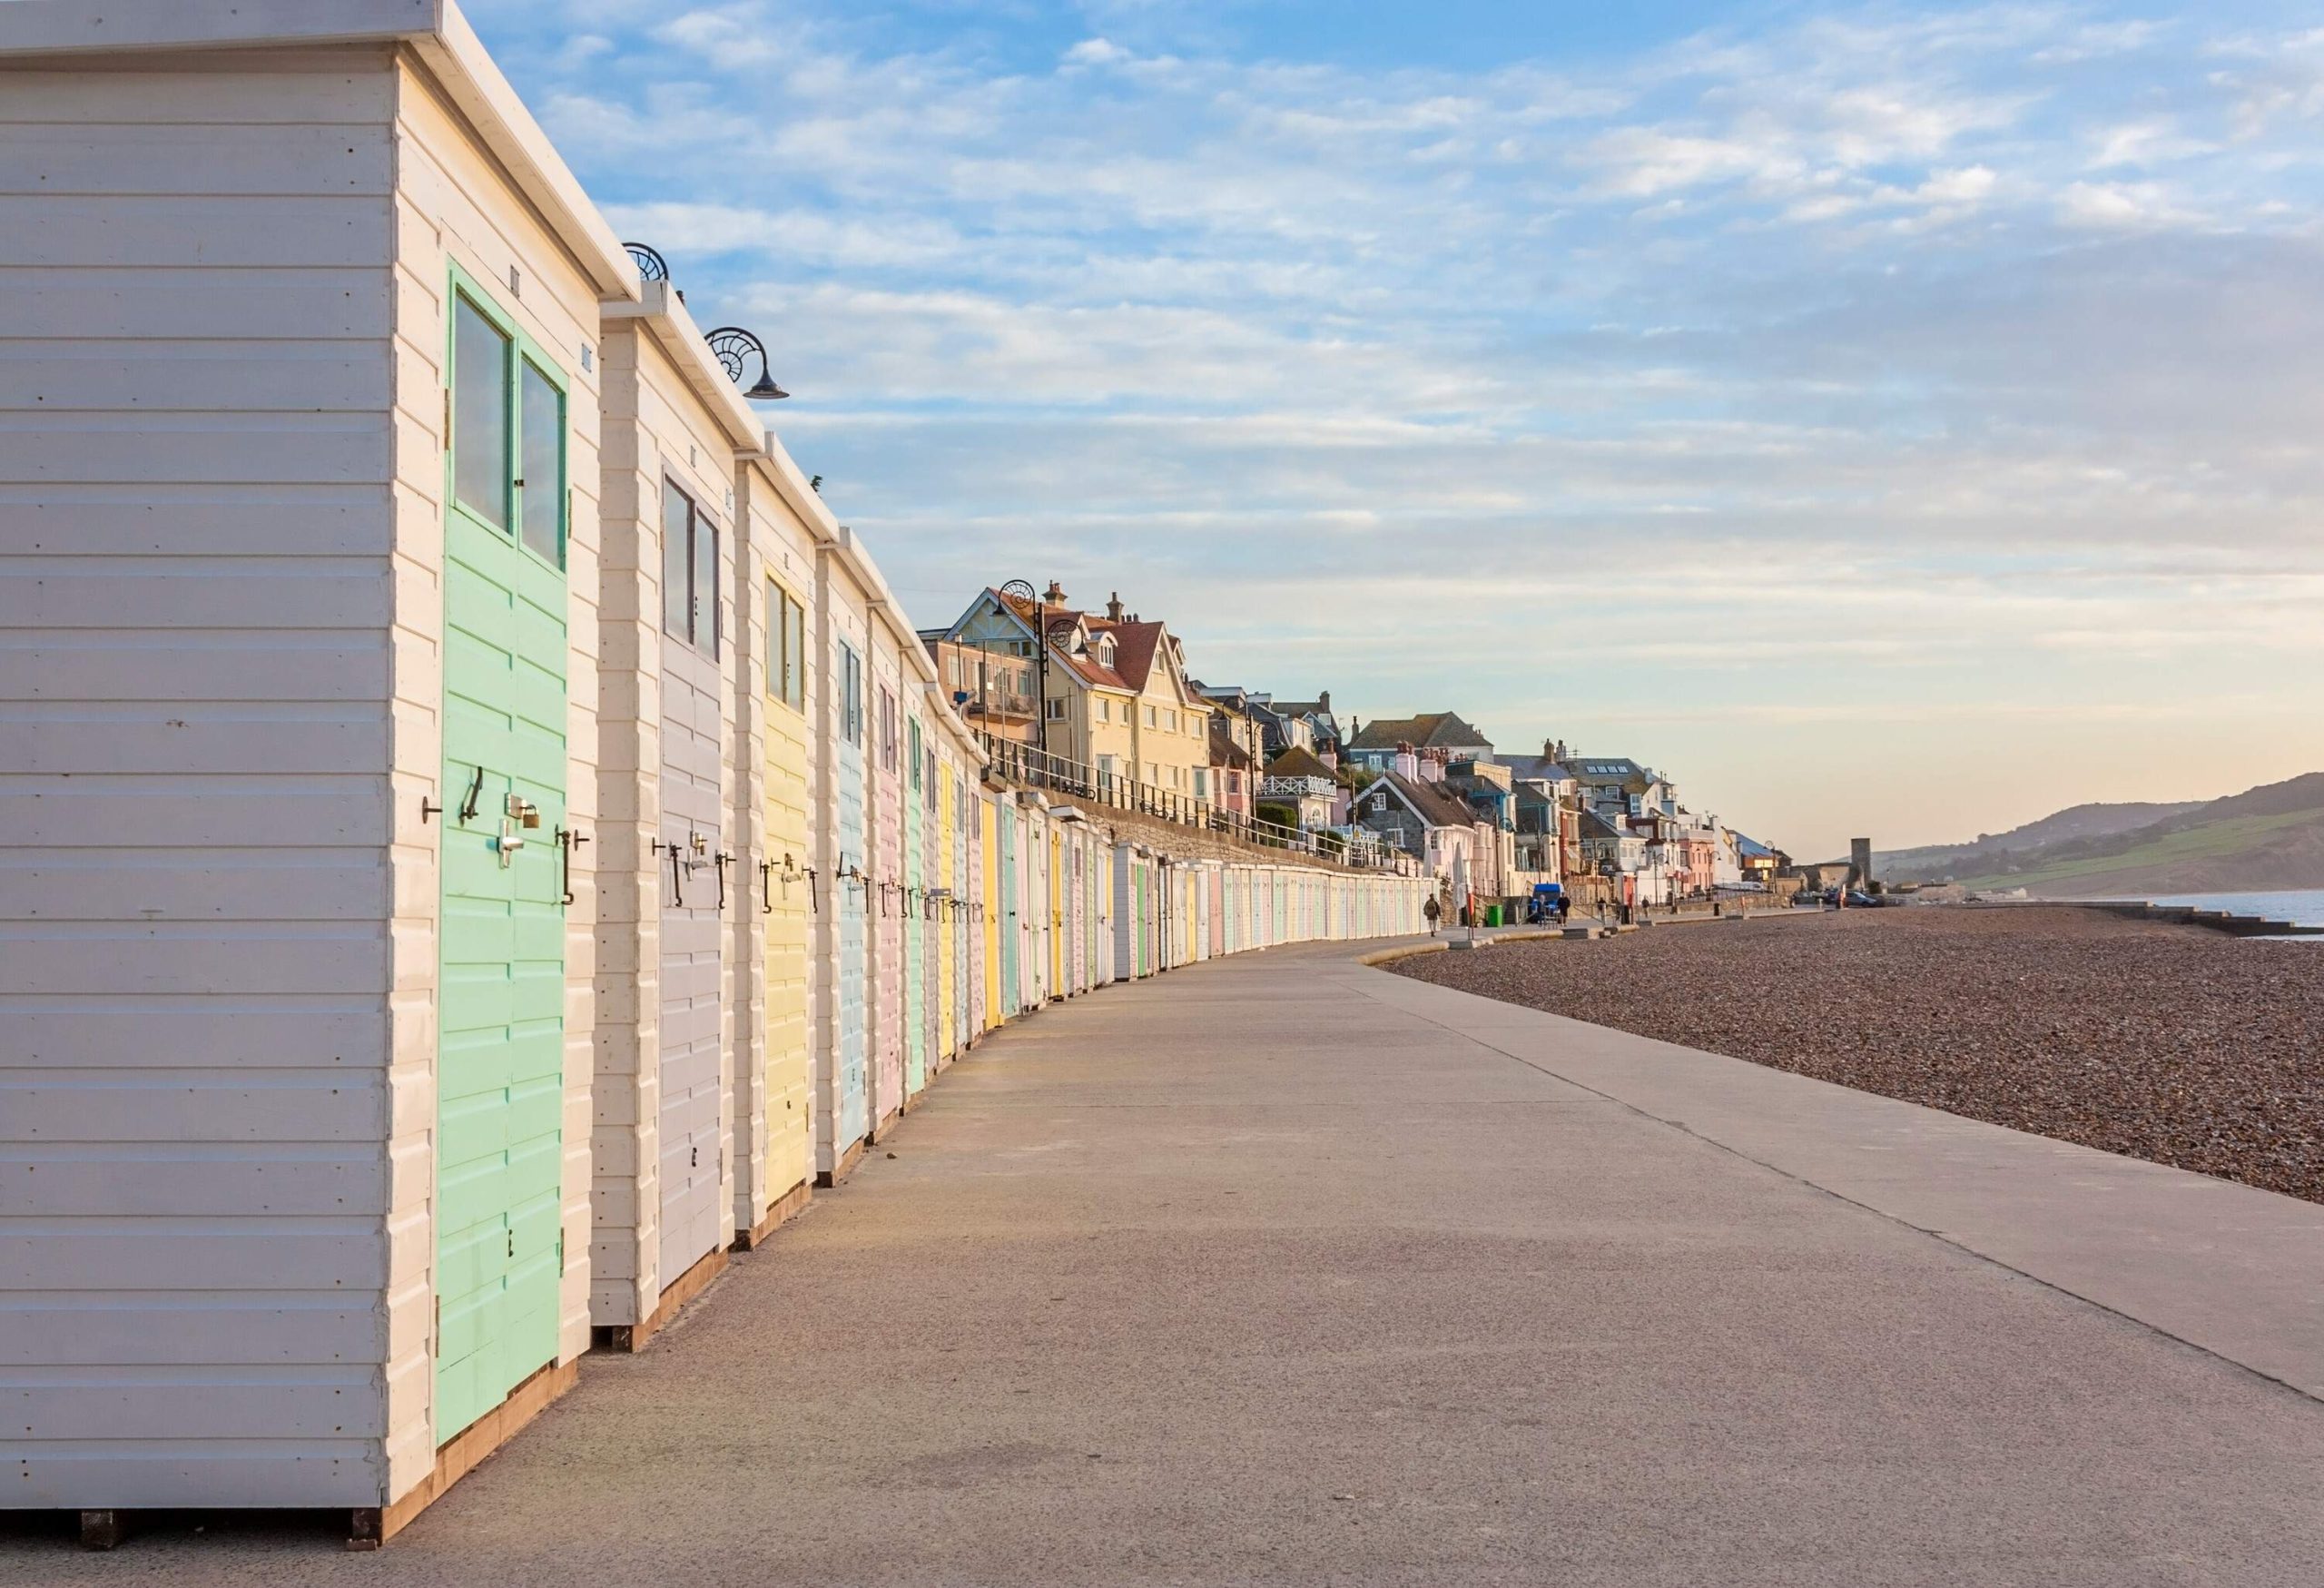 Pastel-coloured beach huts form a vibrant and inviting line along the promenade.